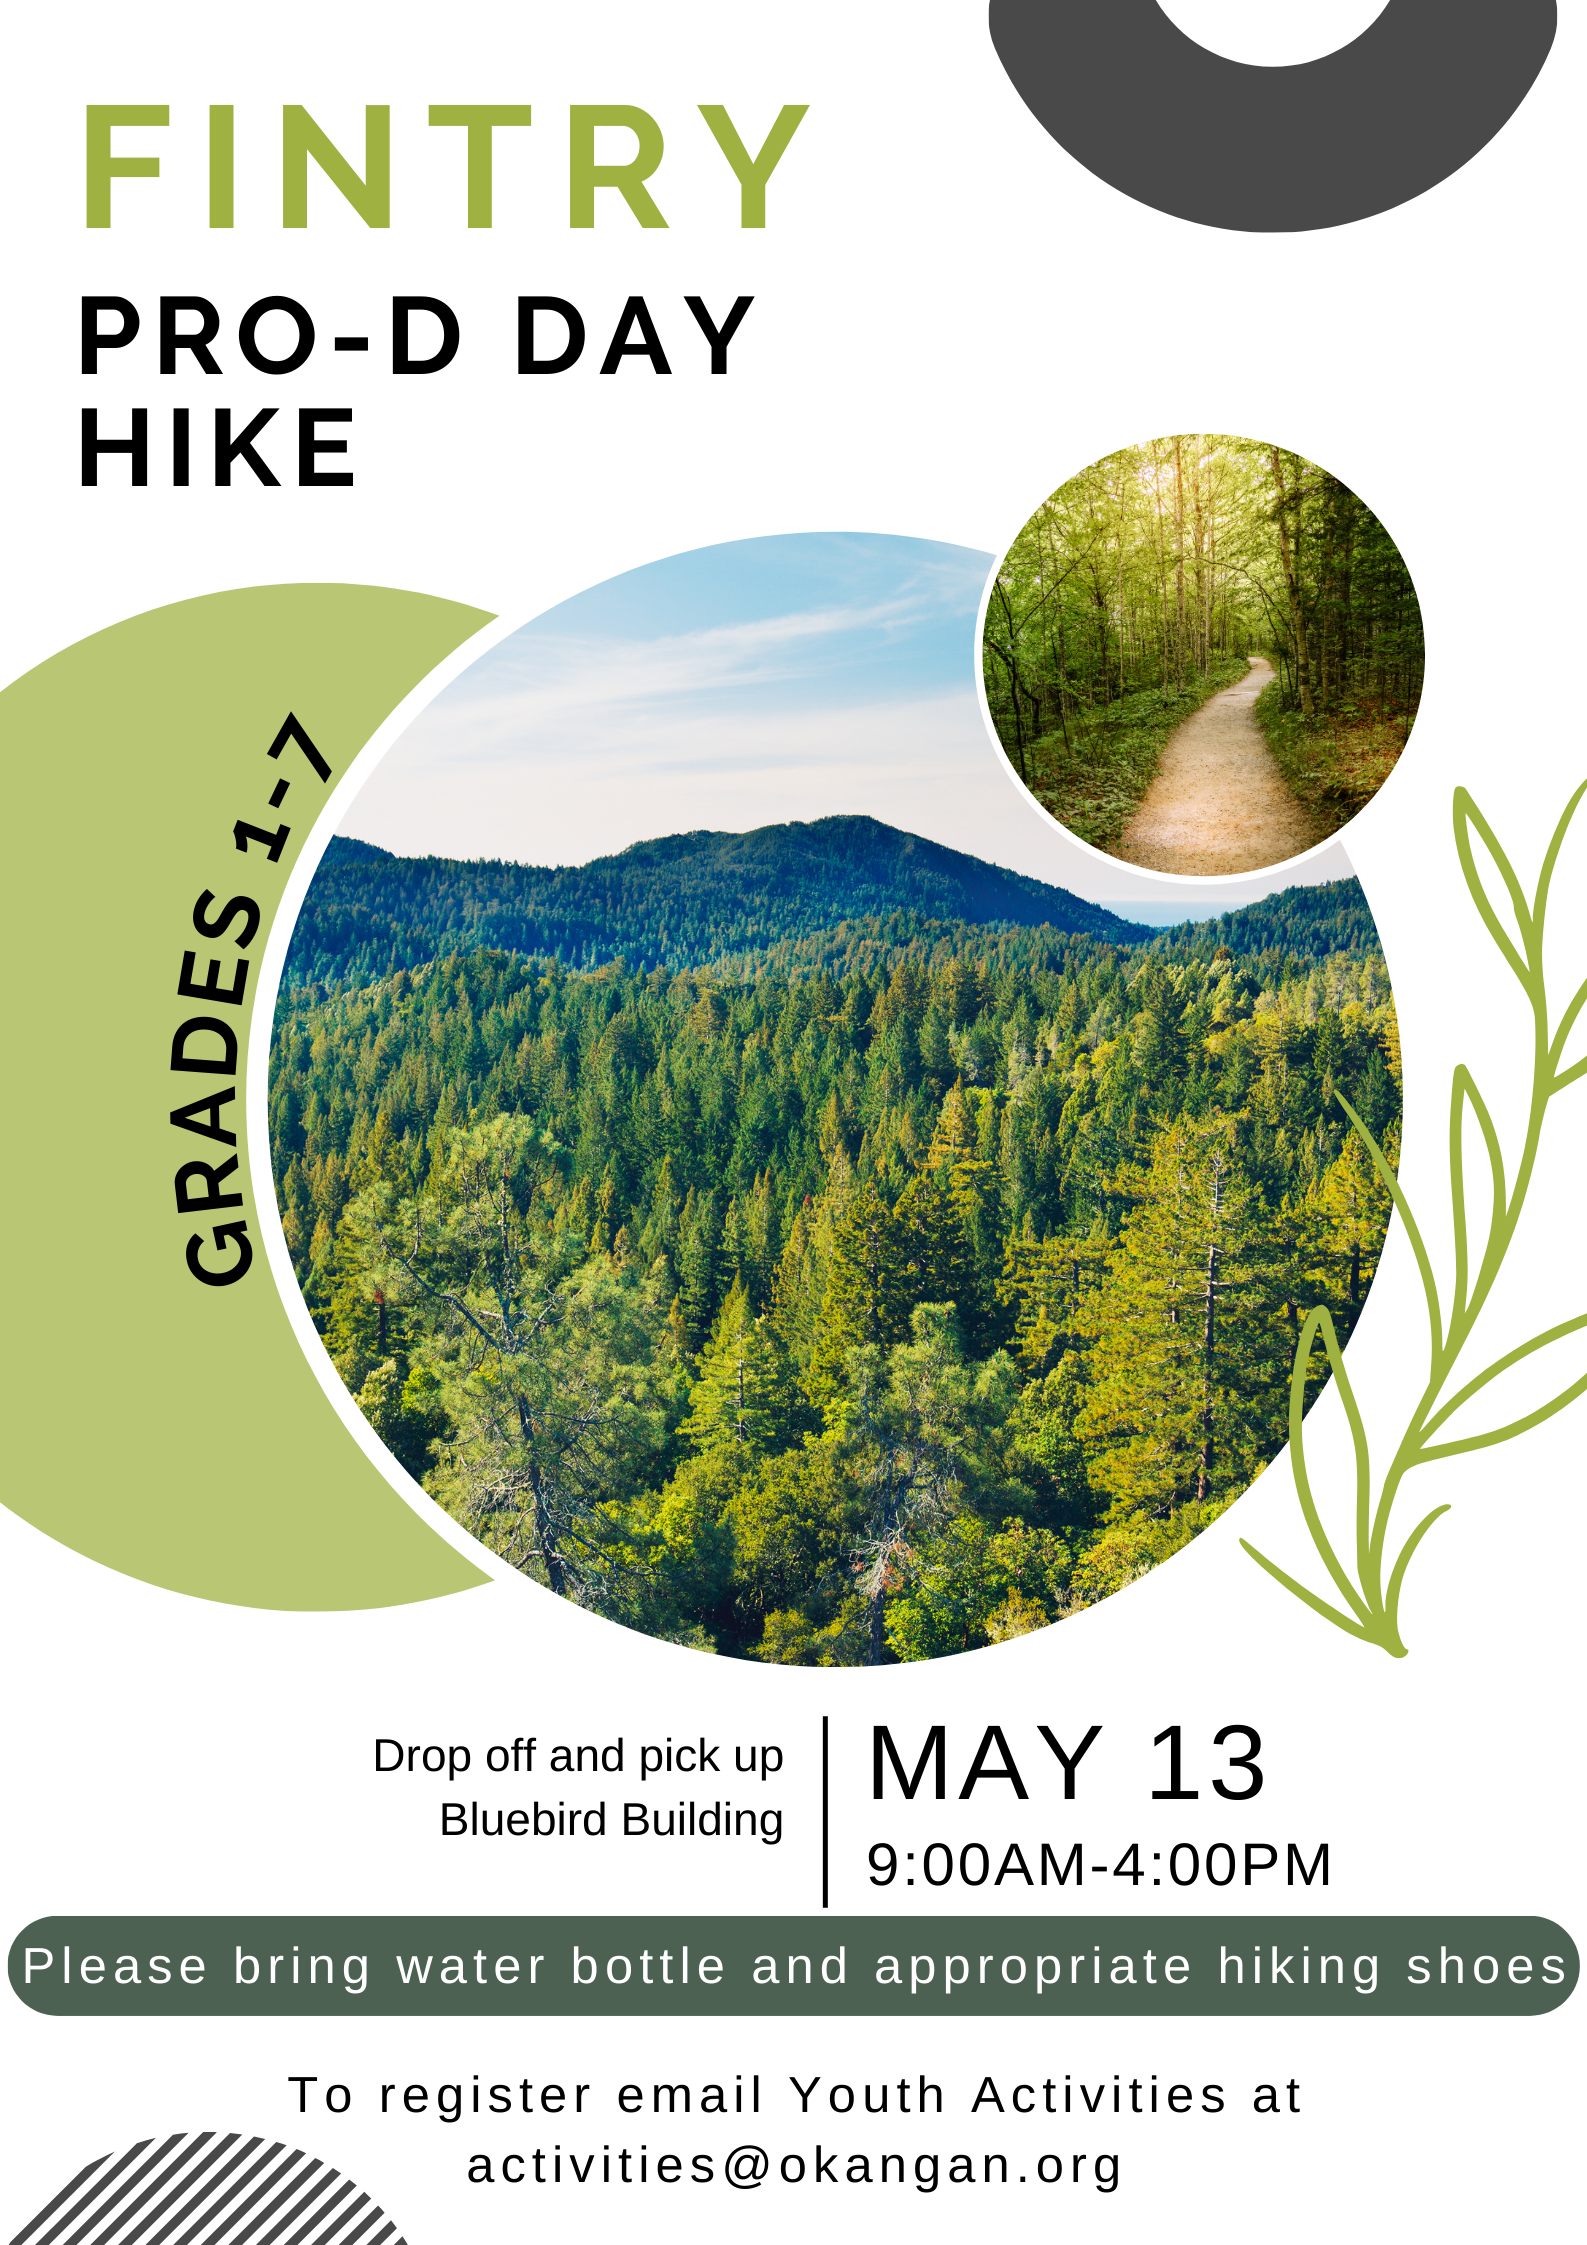 Fintry Pro-D Day hike